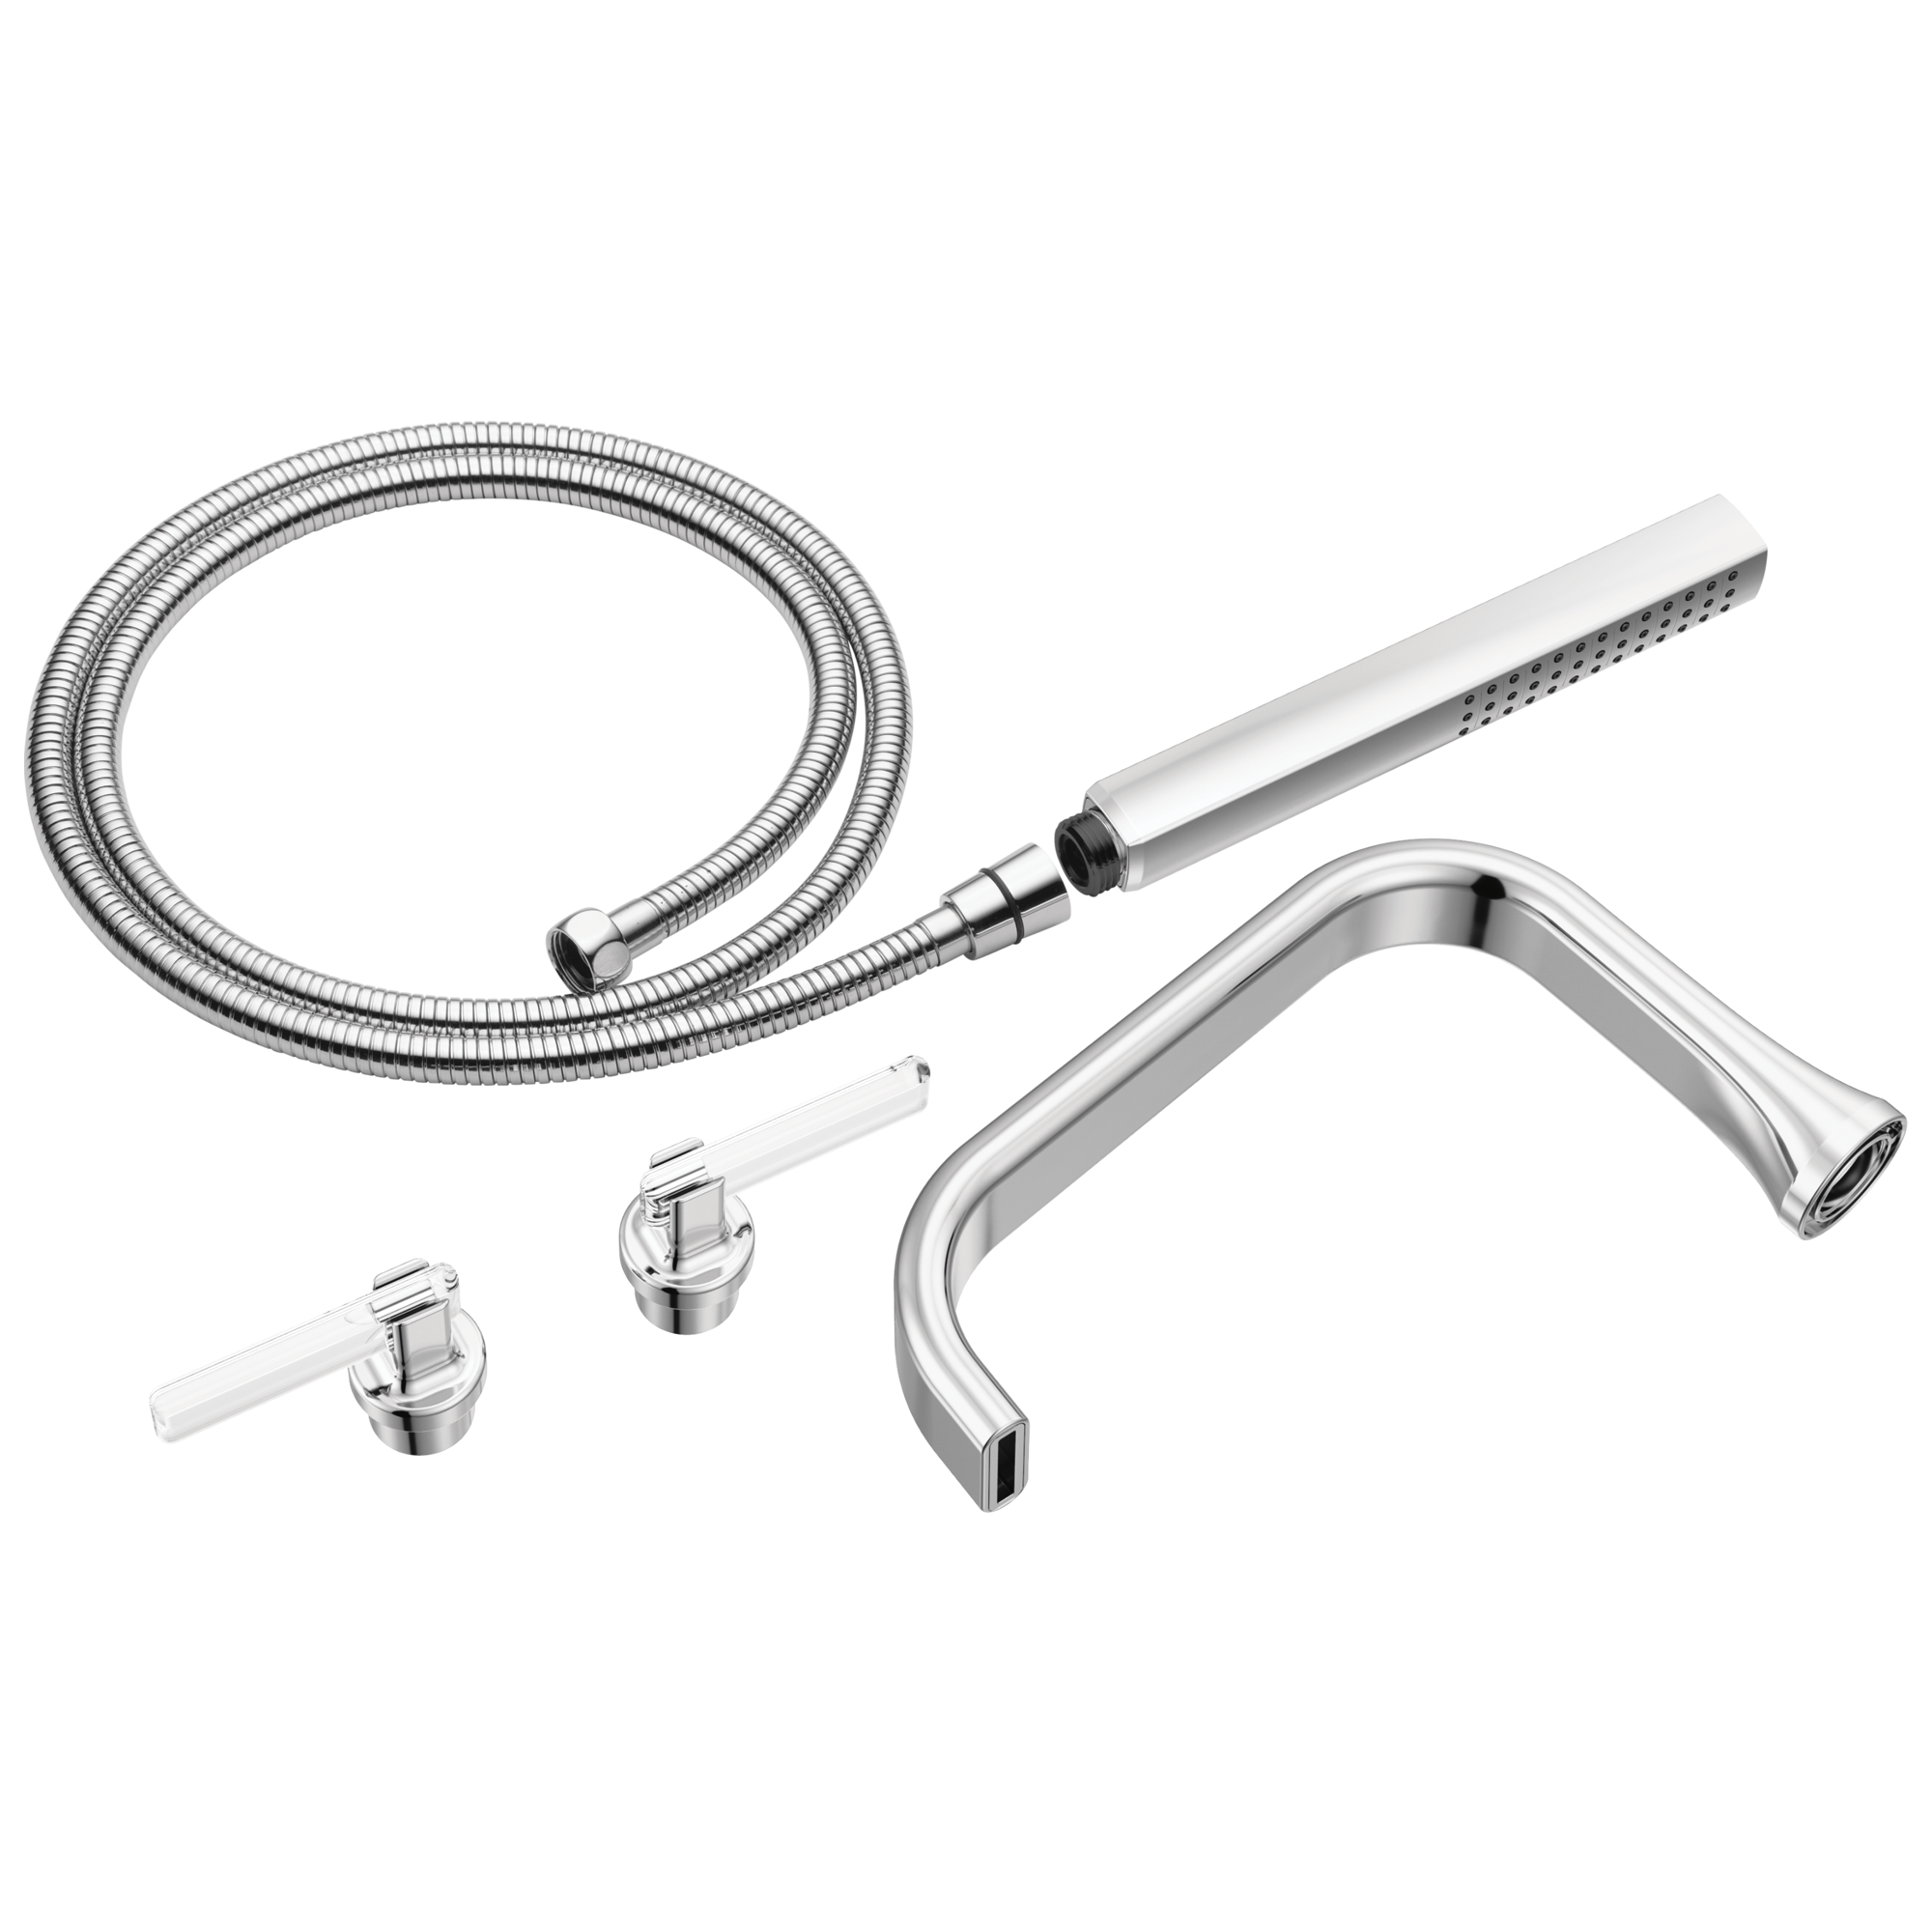 Brizo Allaria Two-Handle Tub Filler Trim Kit with Lever Handles